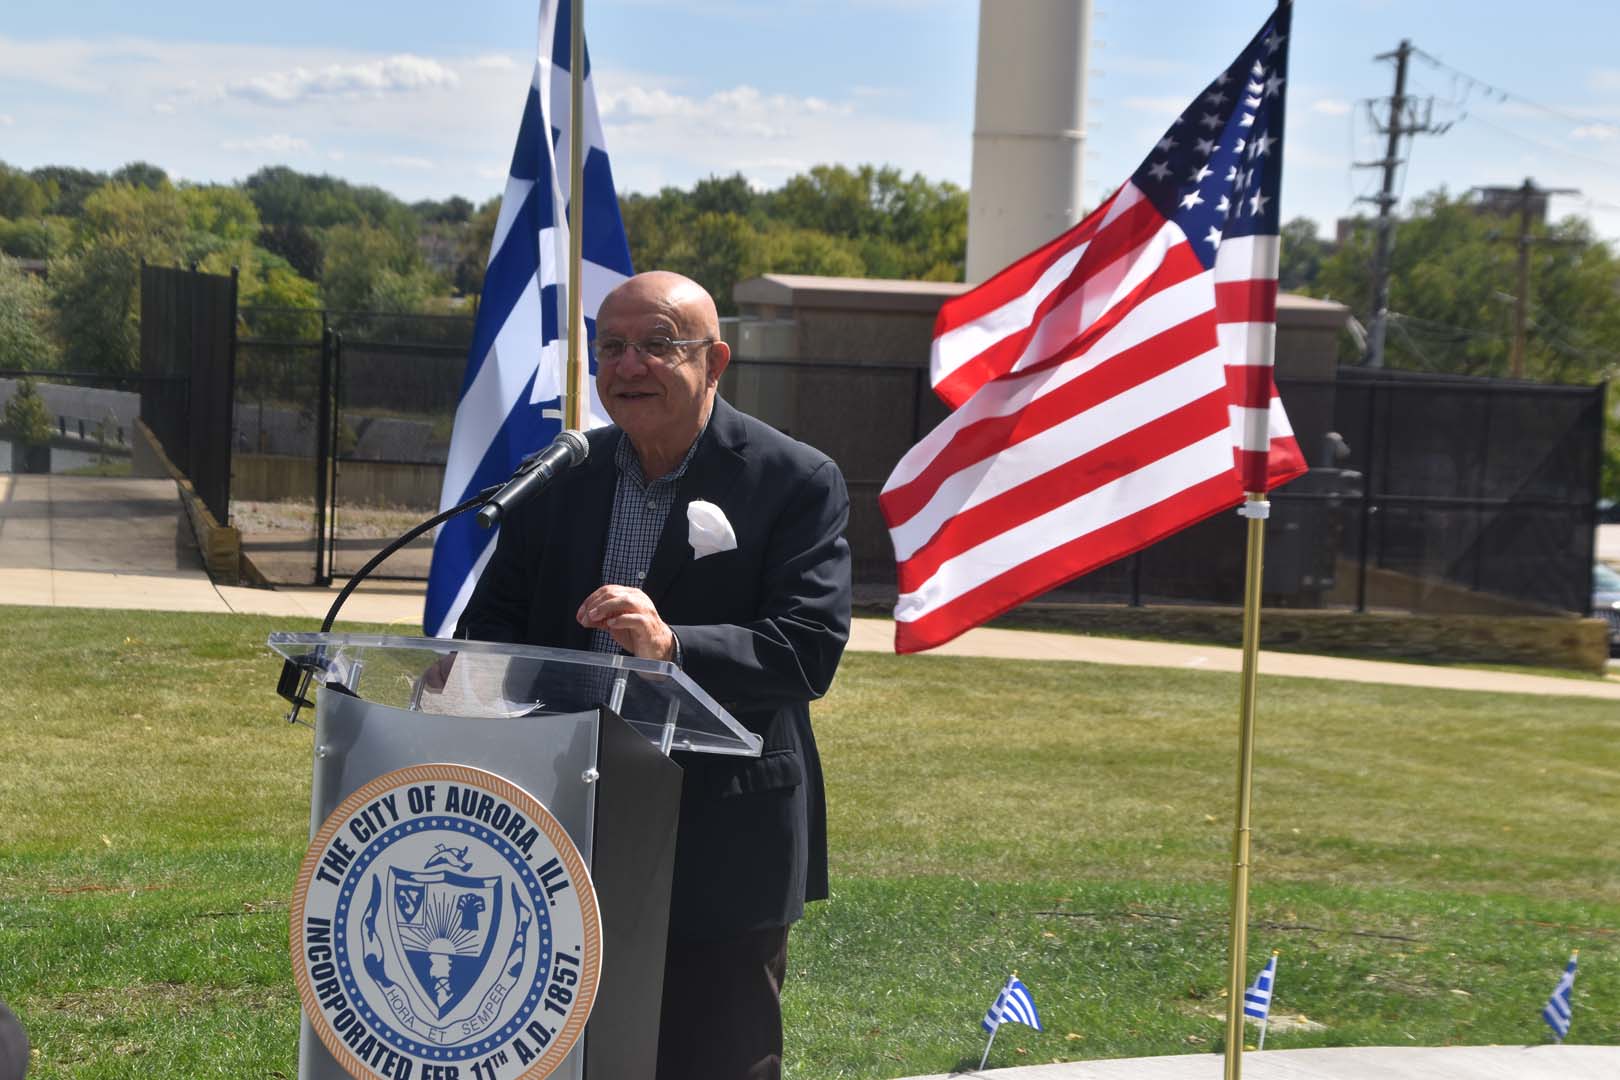 September 25th 2021 monument unveiled in Aurora Illinois - Panagiotis Nikolopoulos addresses guests